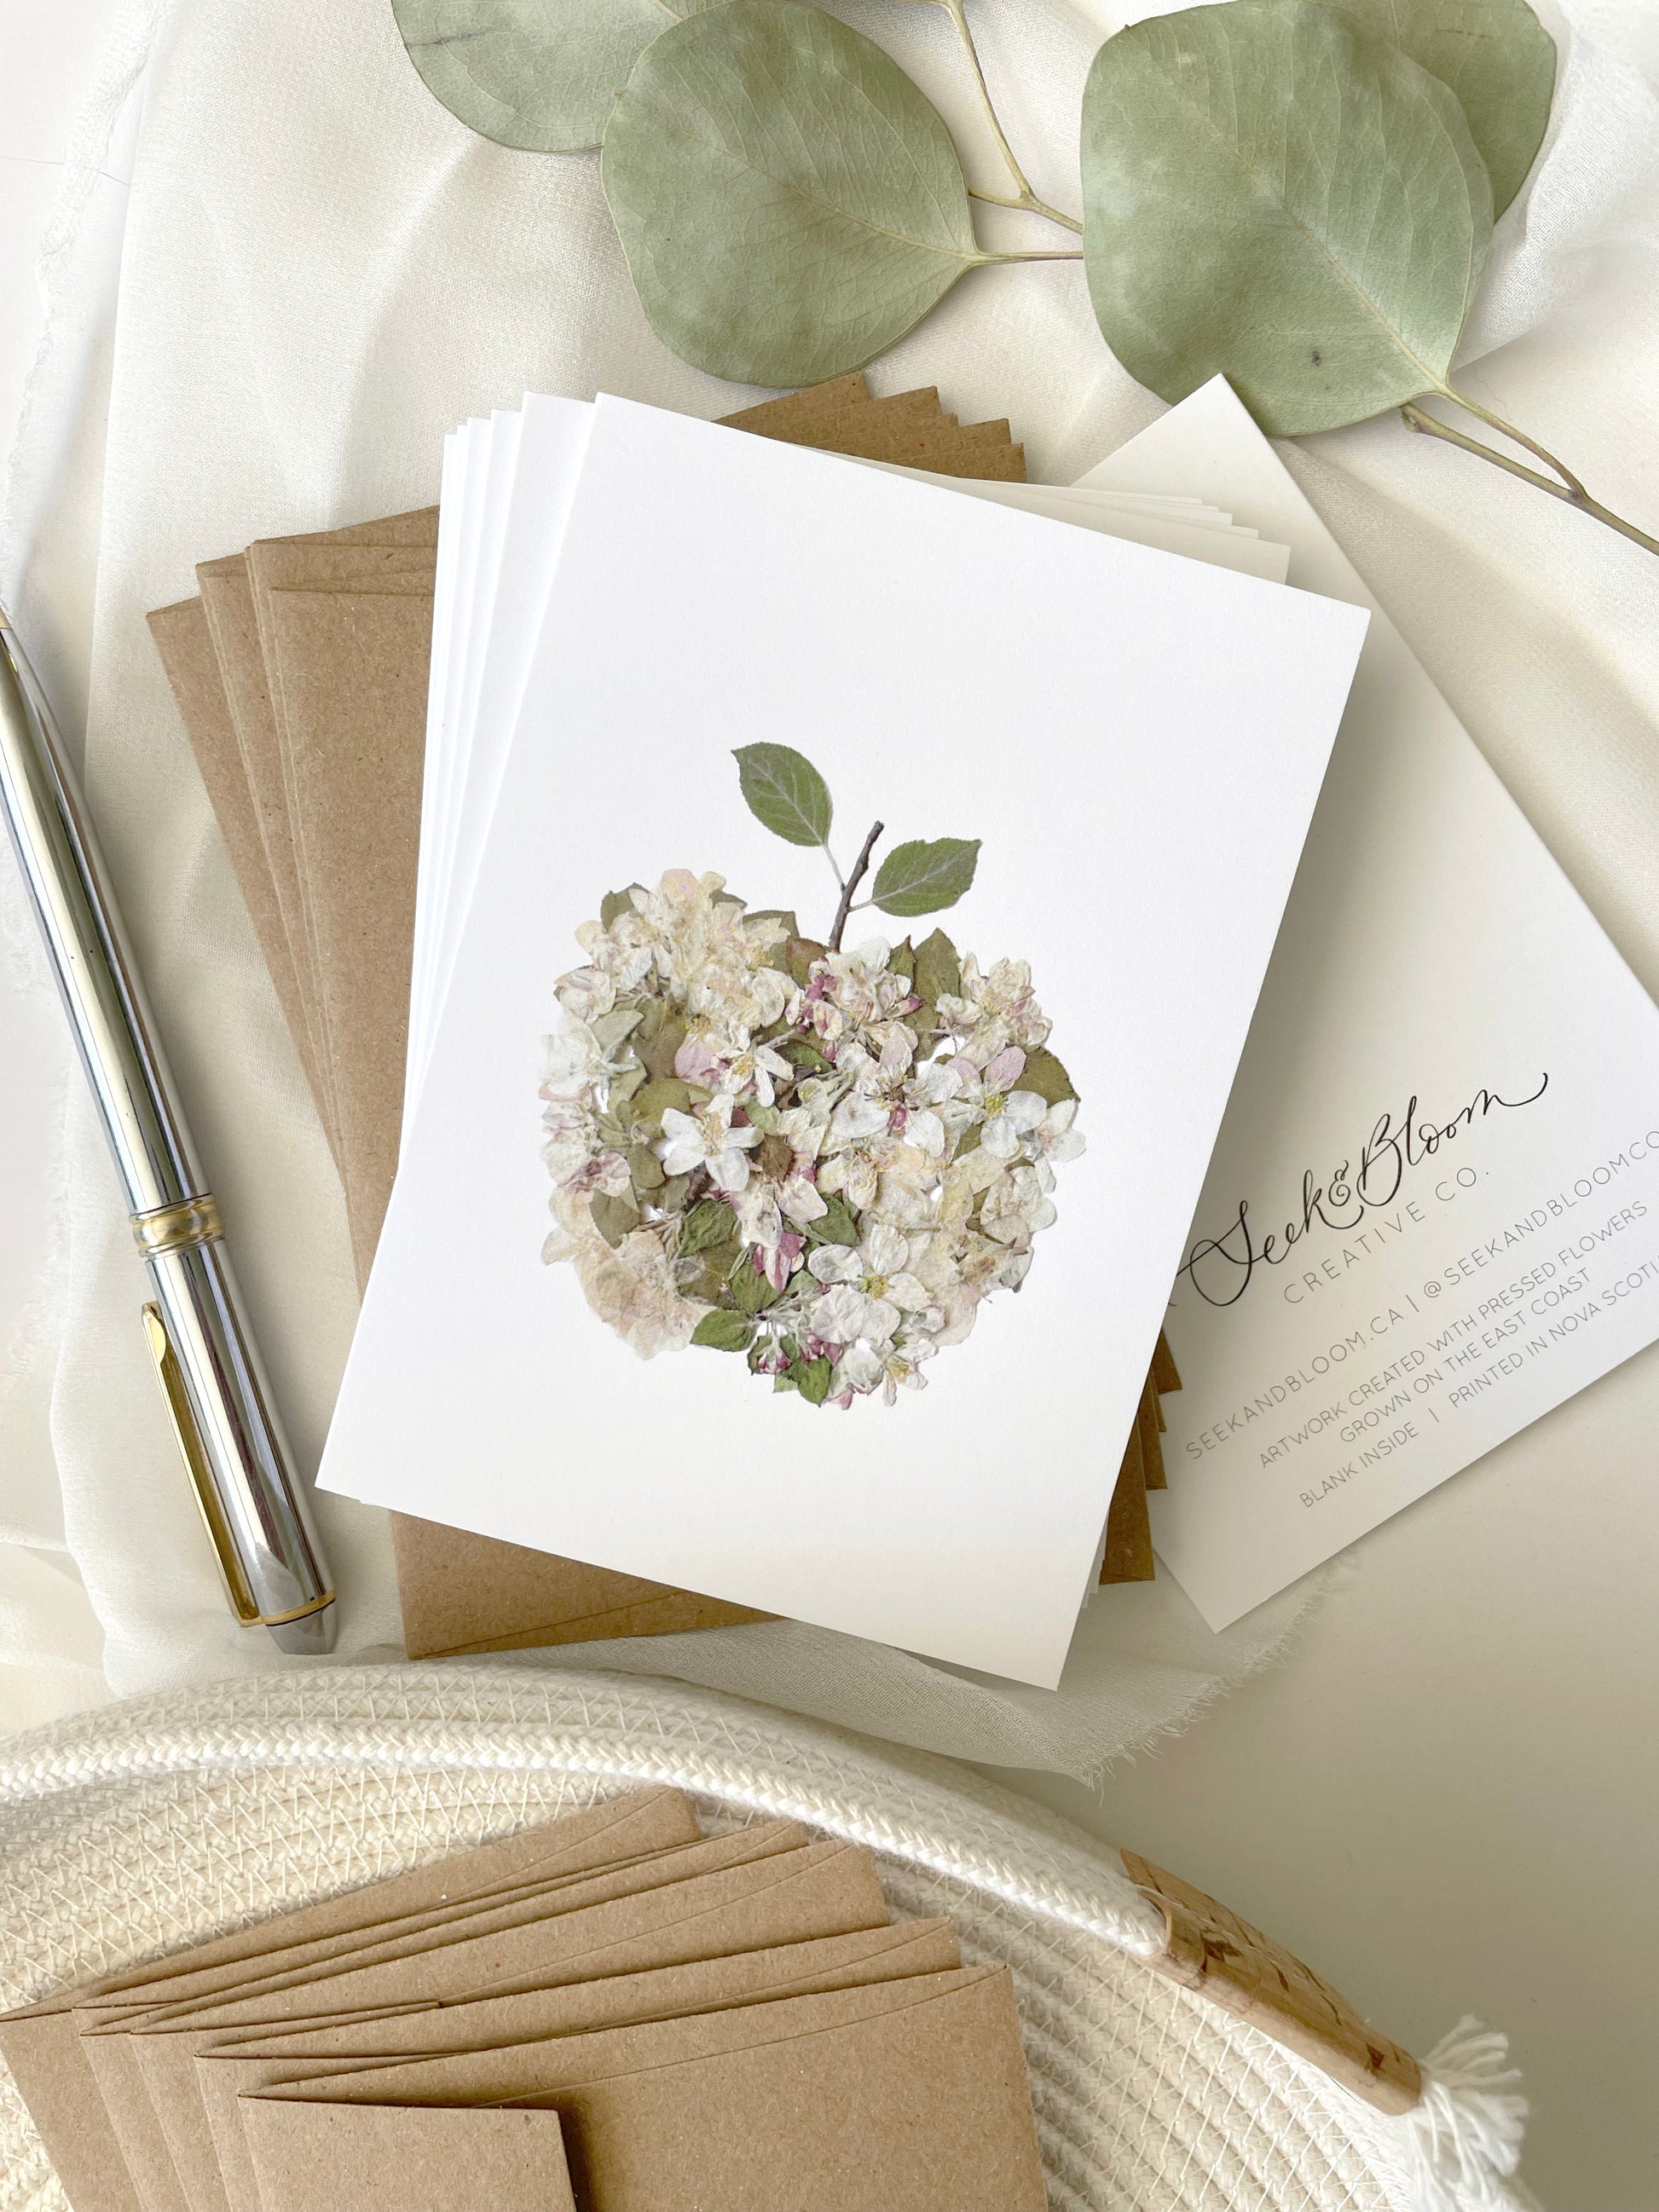 apple artwork made from white pink and green apple blossom flowers and leaves 